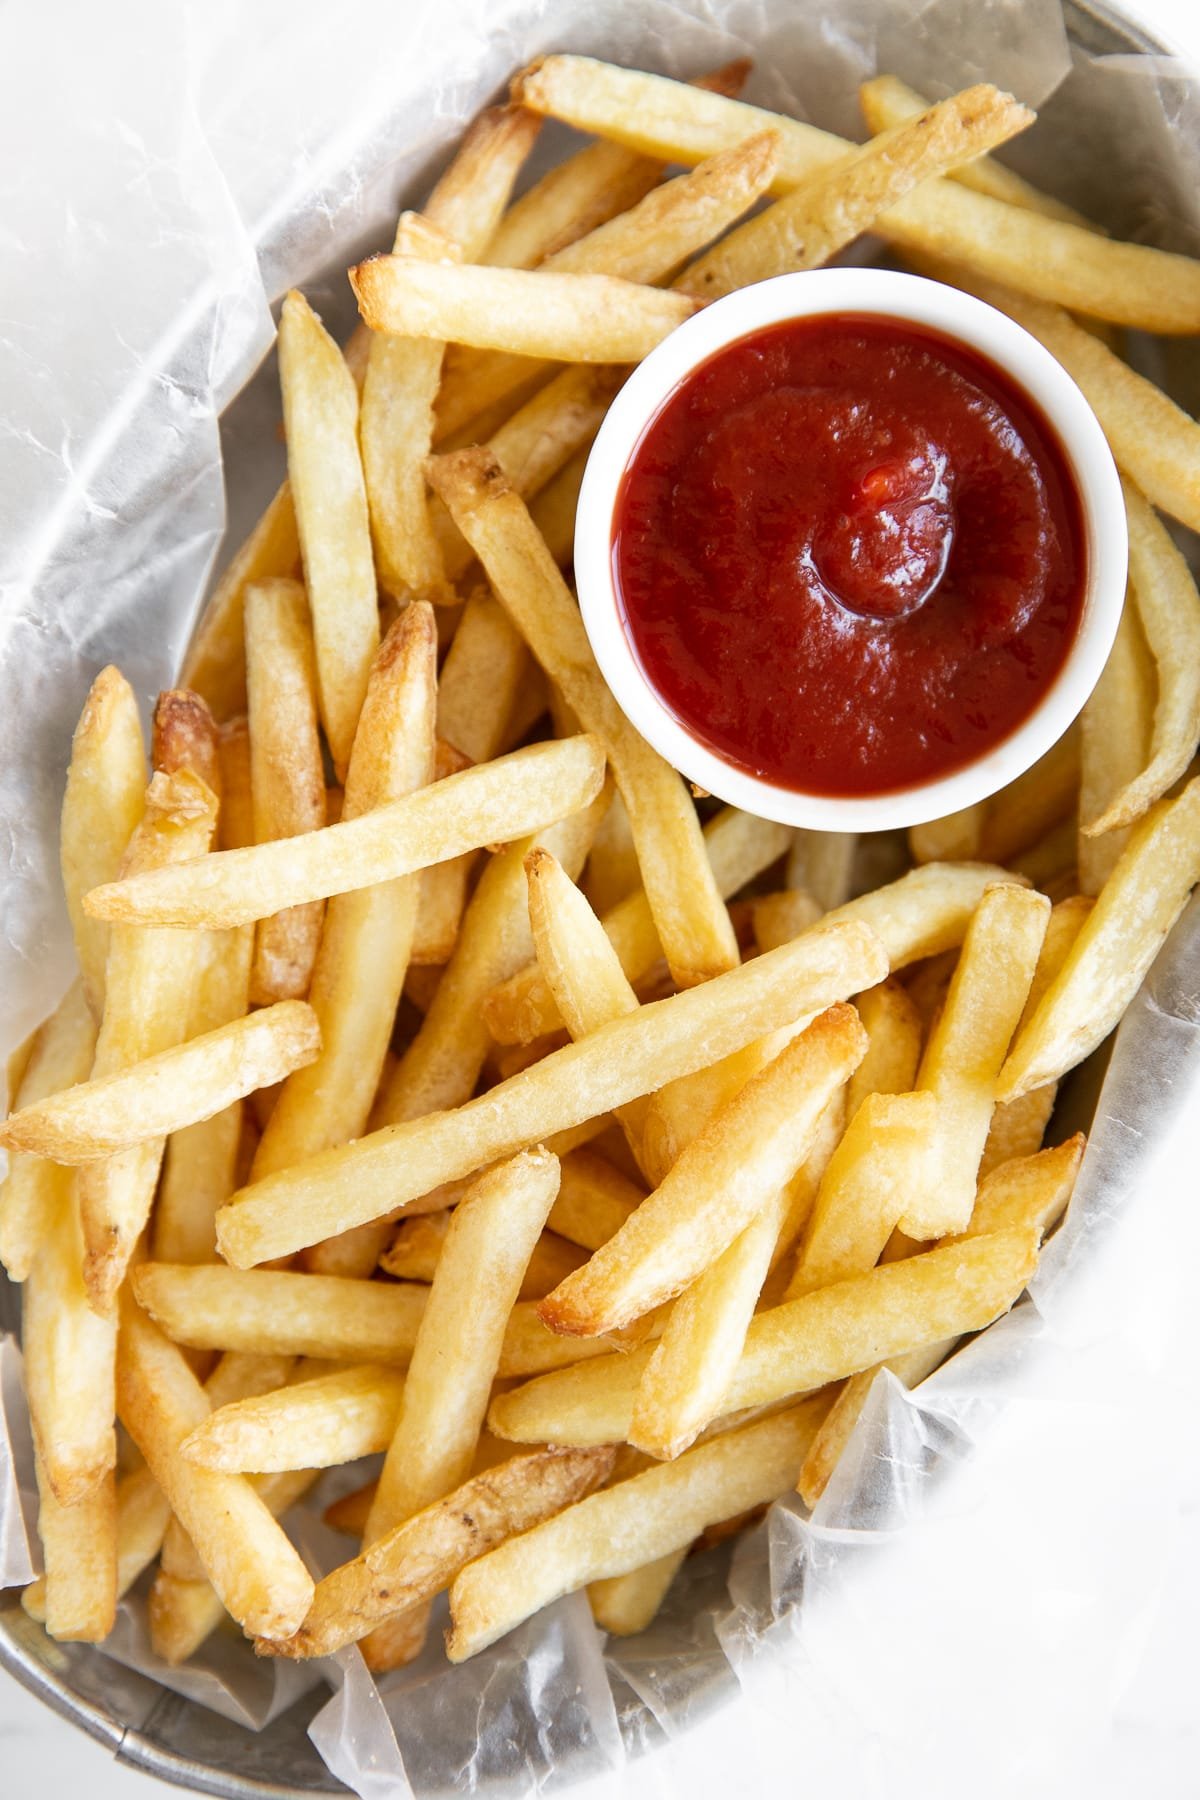 Metal serving basket filled with store-bought cooked frozen french fries and a small bowl of ketchup.